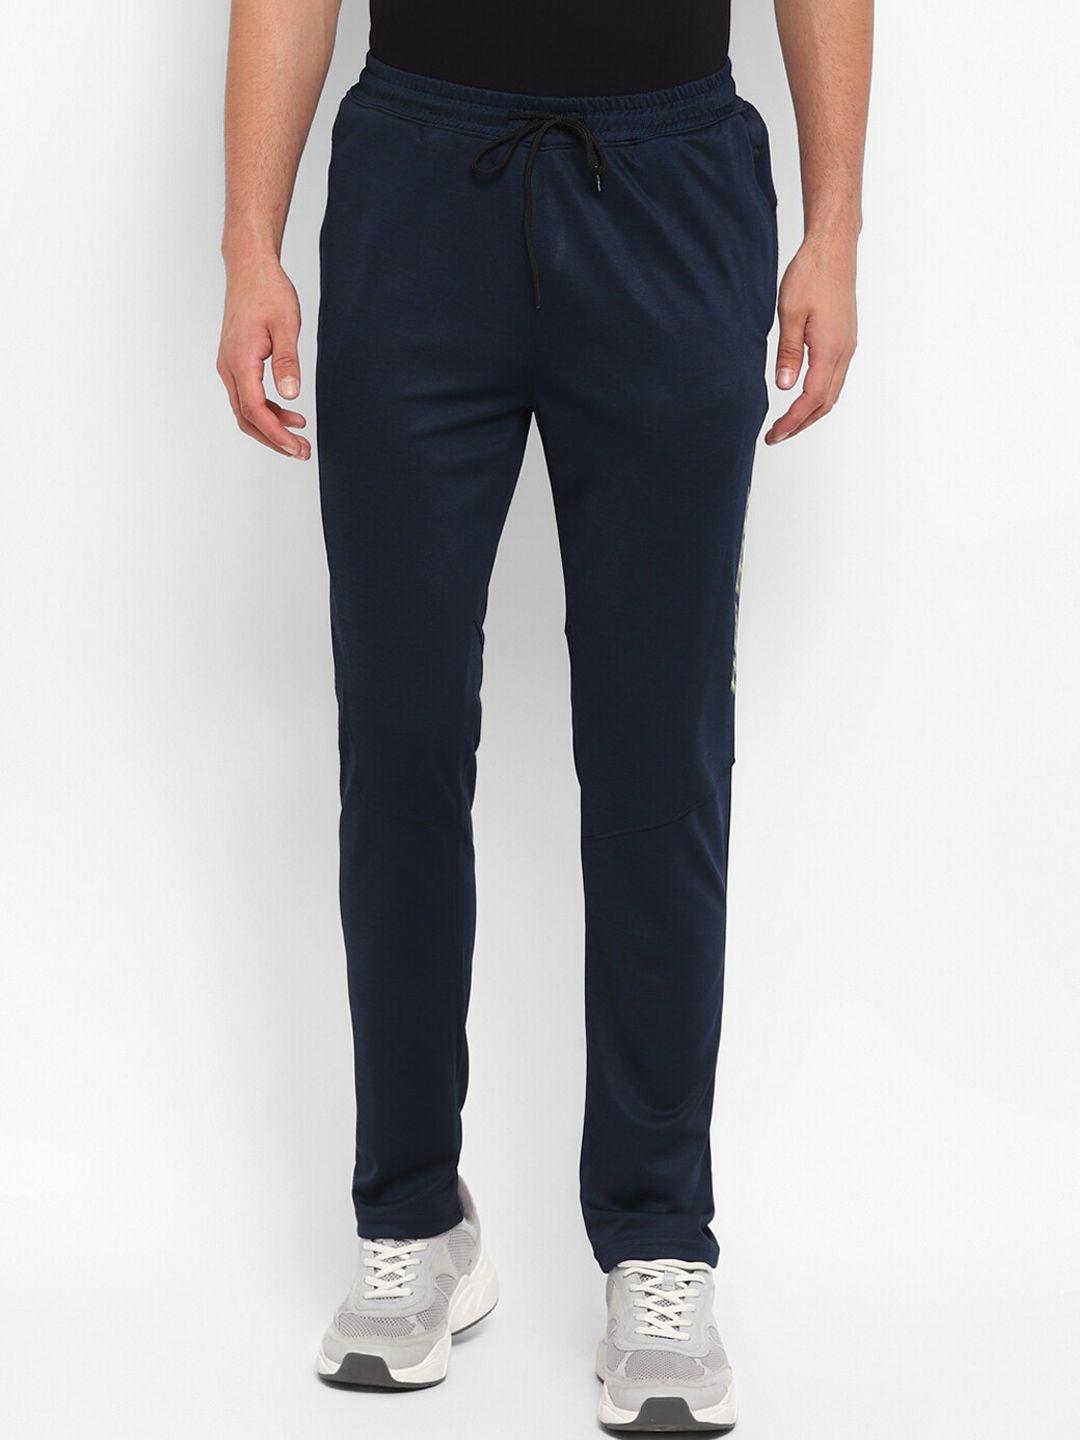 furo by red chief men navy blue track pants